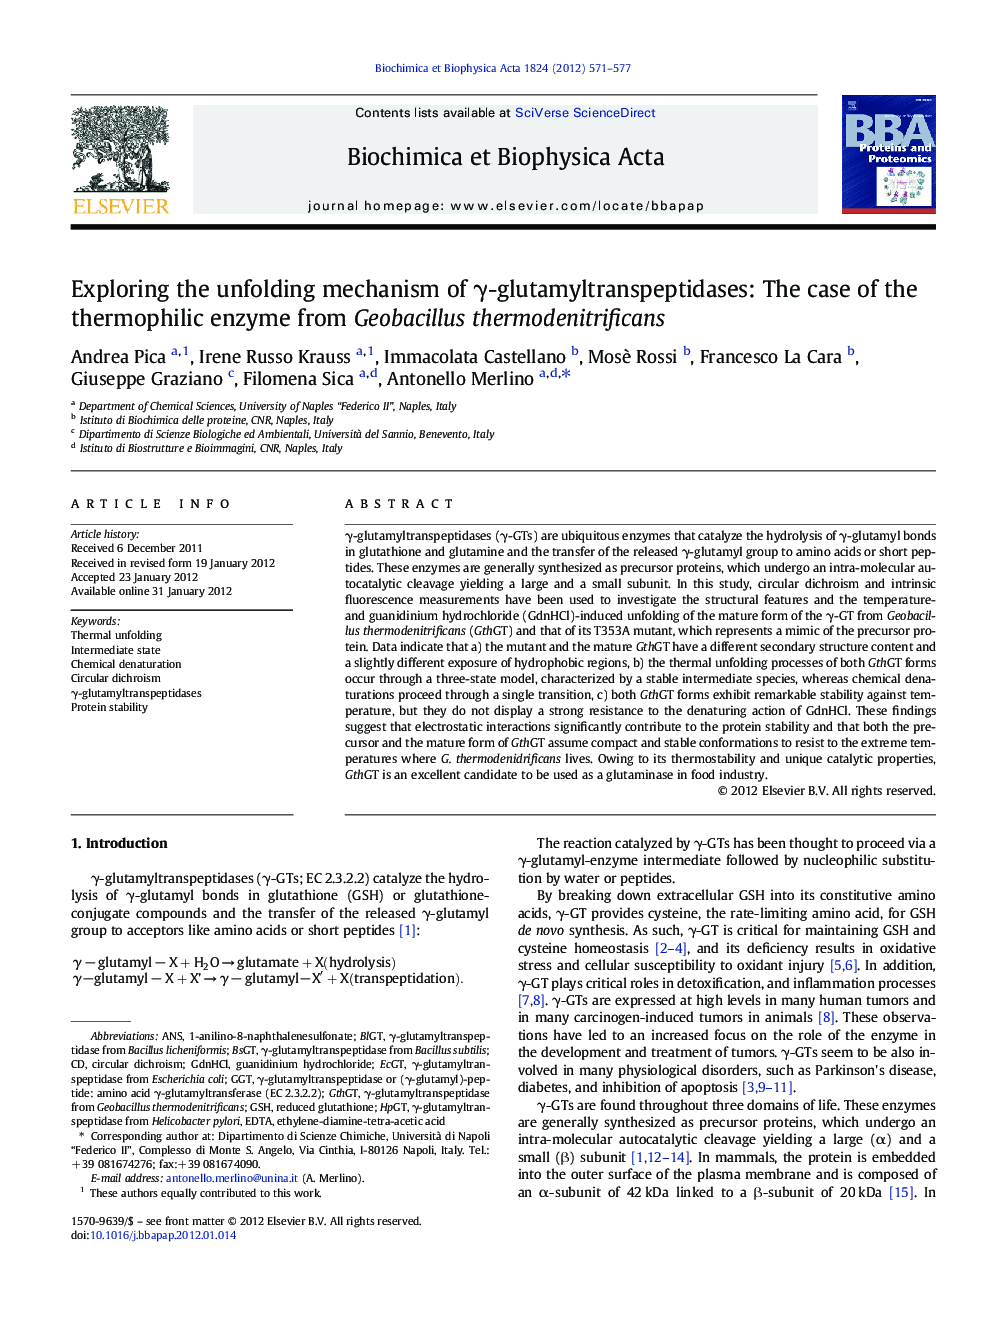 Exploring the unfolding mechanism of Î³-glutamyltranspeptidases: The case of the thermophilic enzyme from Geobacillus thermodenitrificans